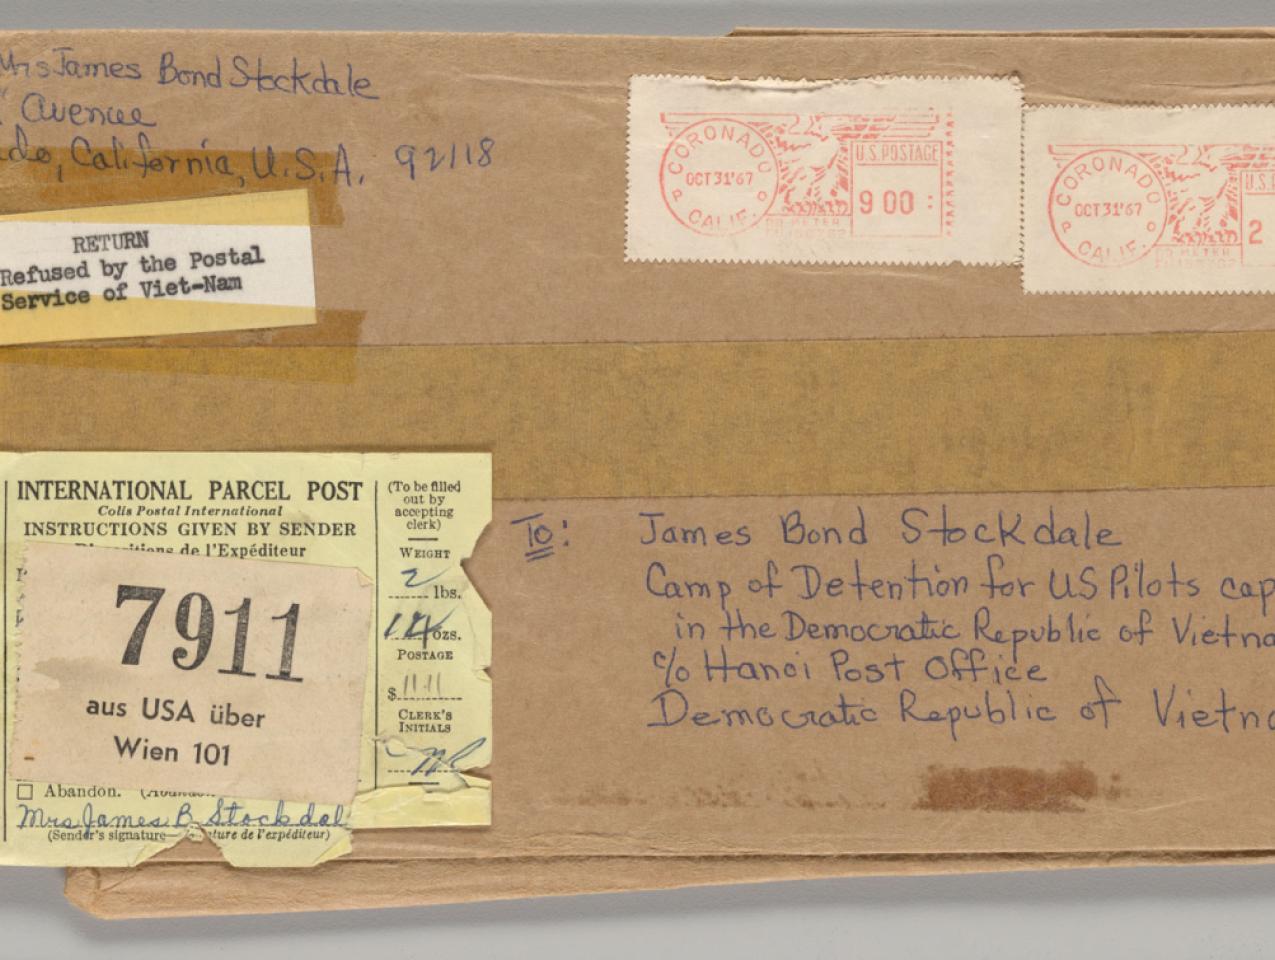 Stamped brown envelope from Sybil Stockdale to James B. Stockdale